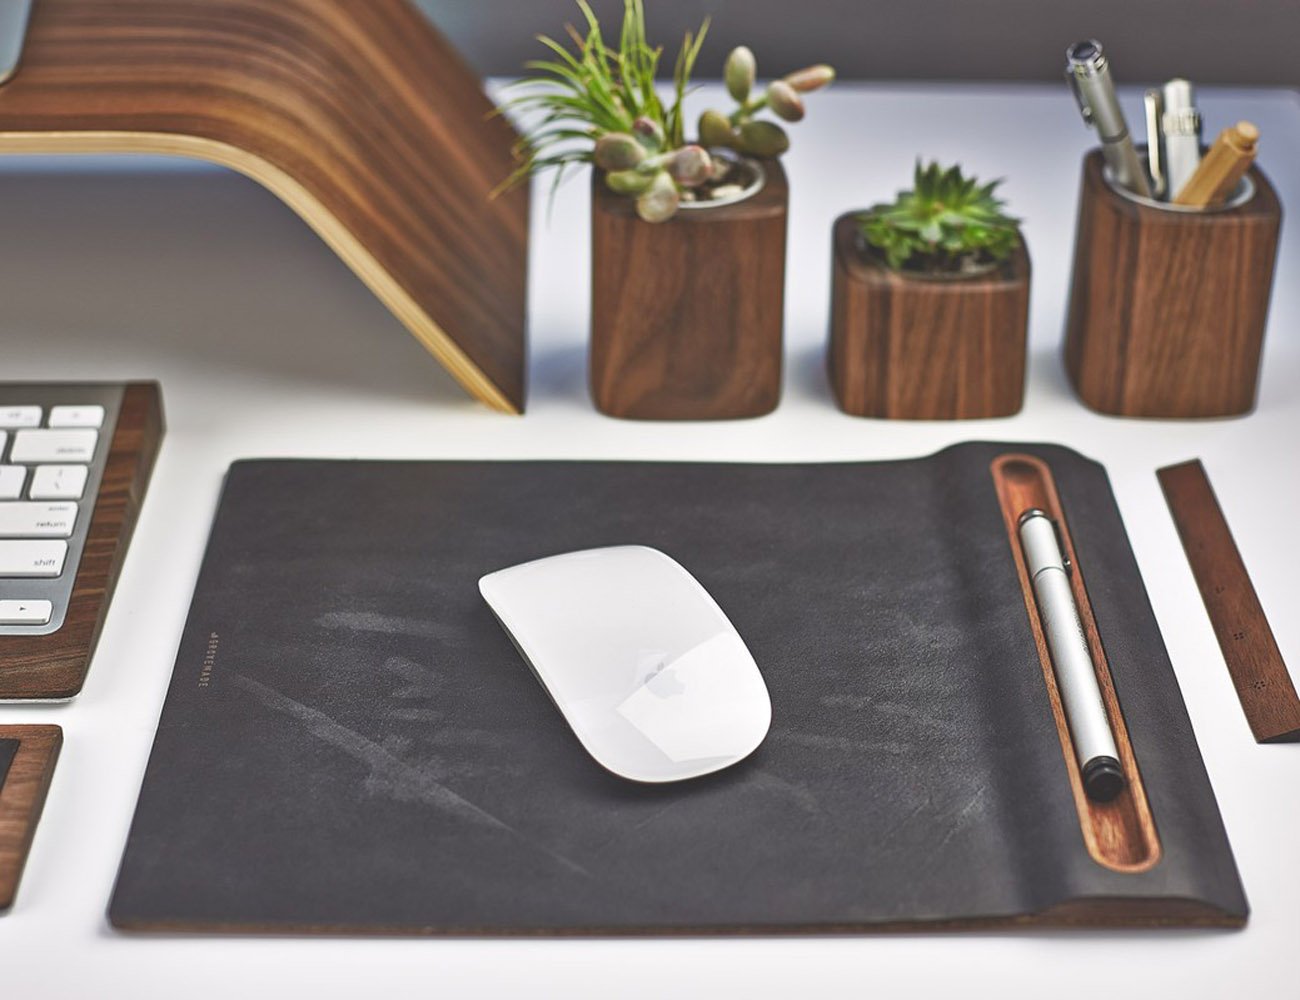 Grovemade Leather & Wood Mouse Pad boasts vegetable-tanned leather and a layered design